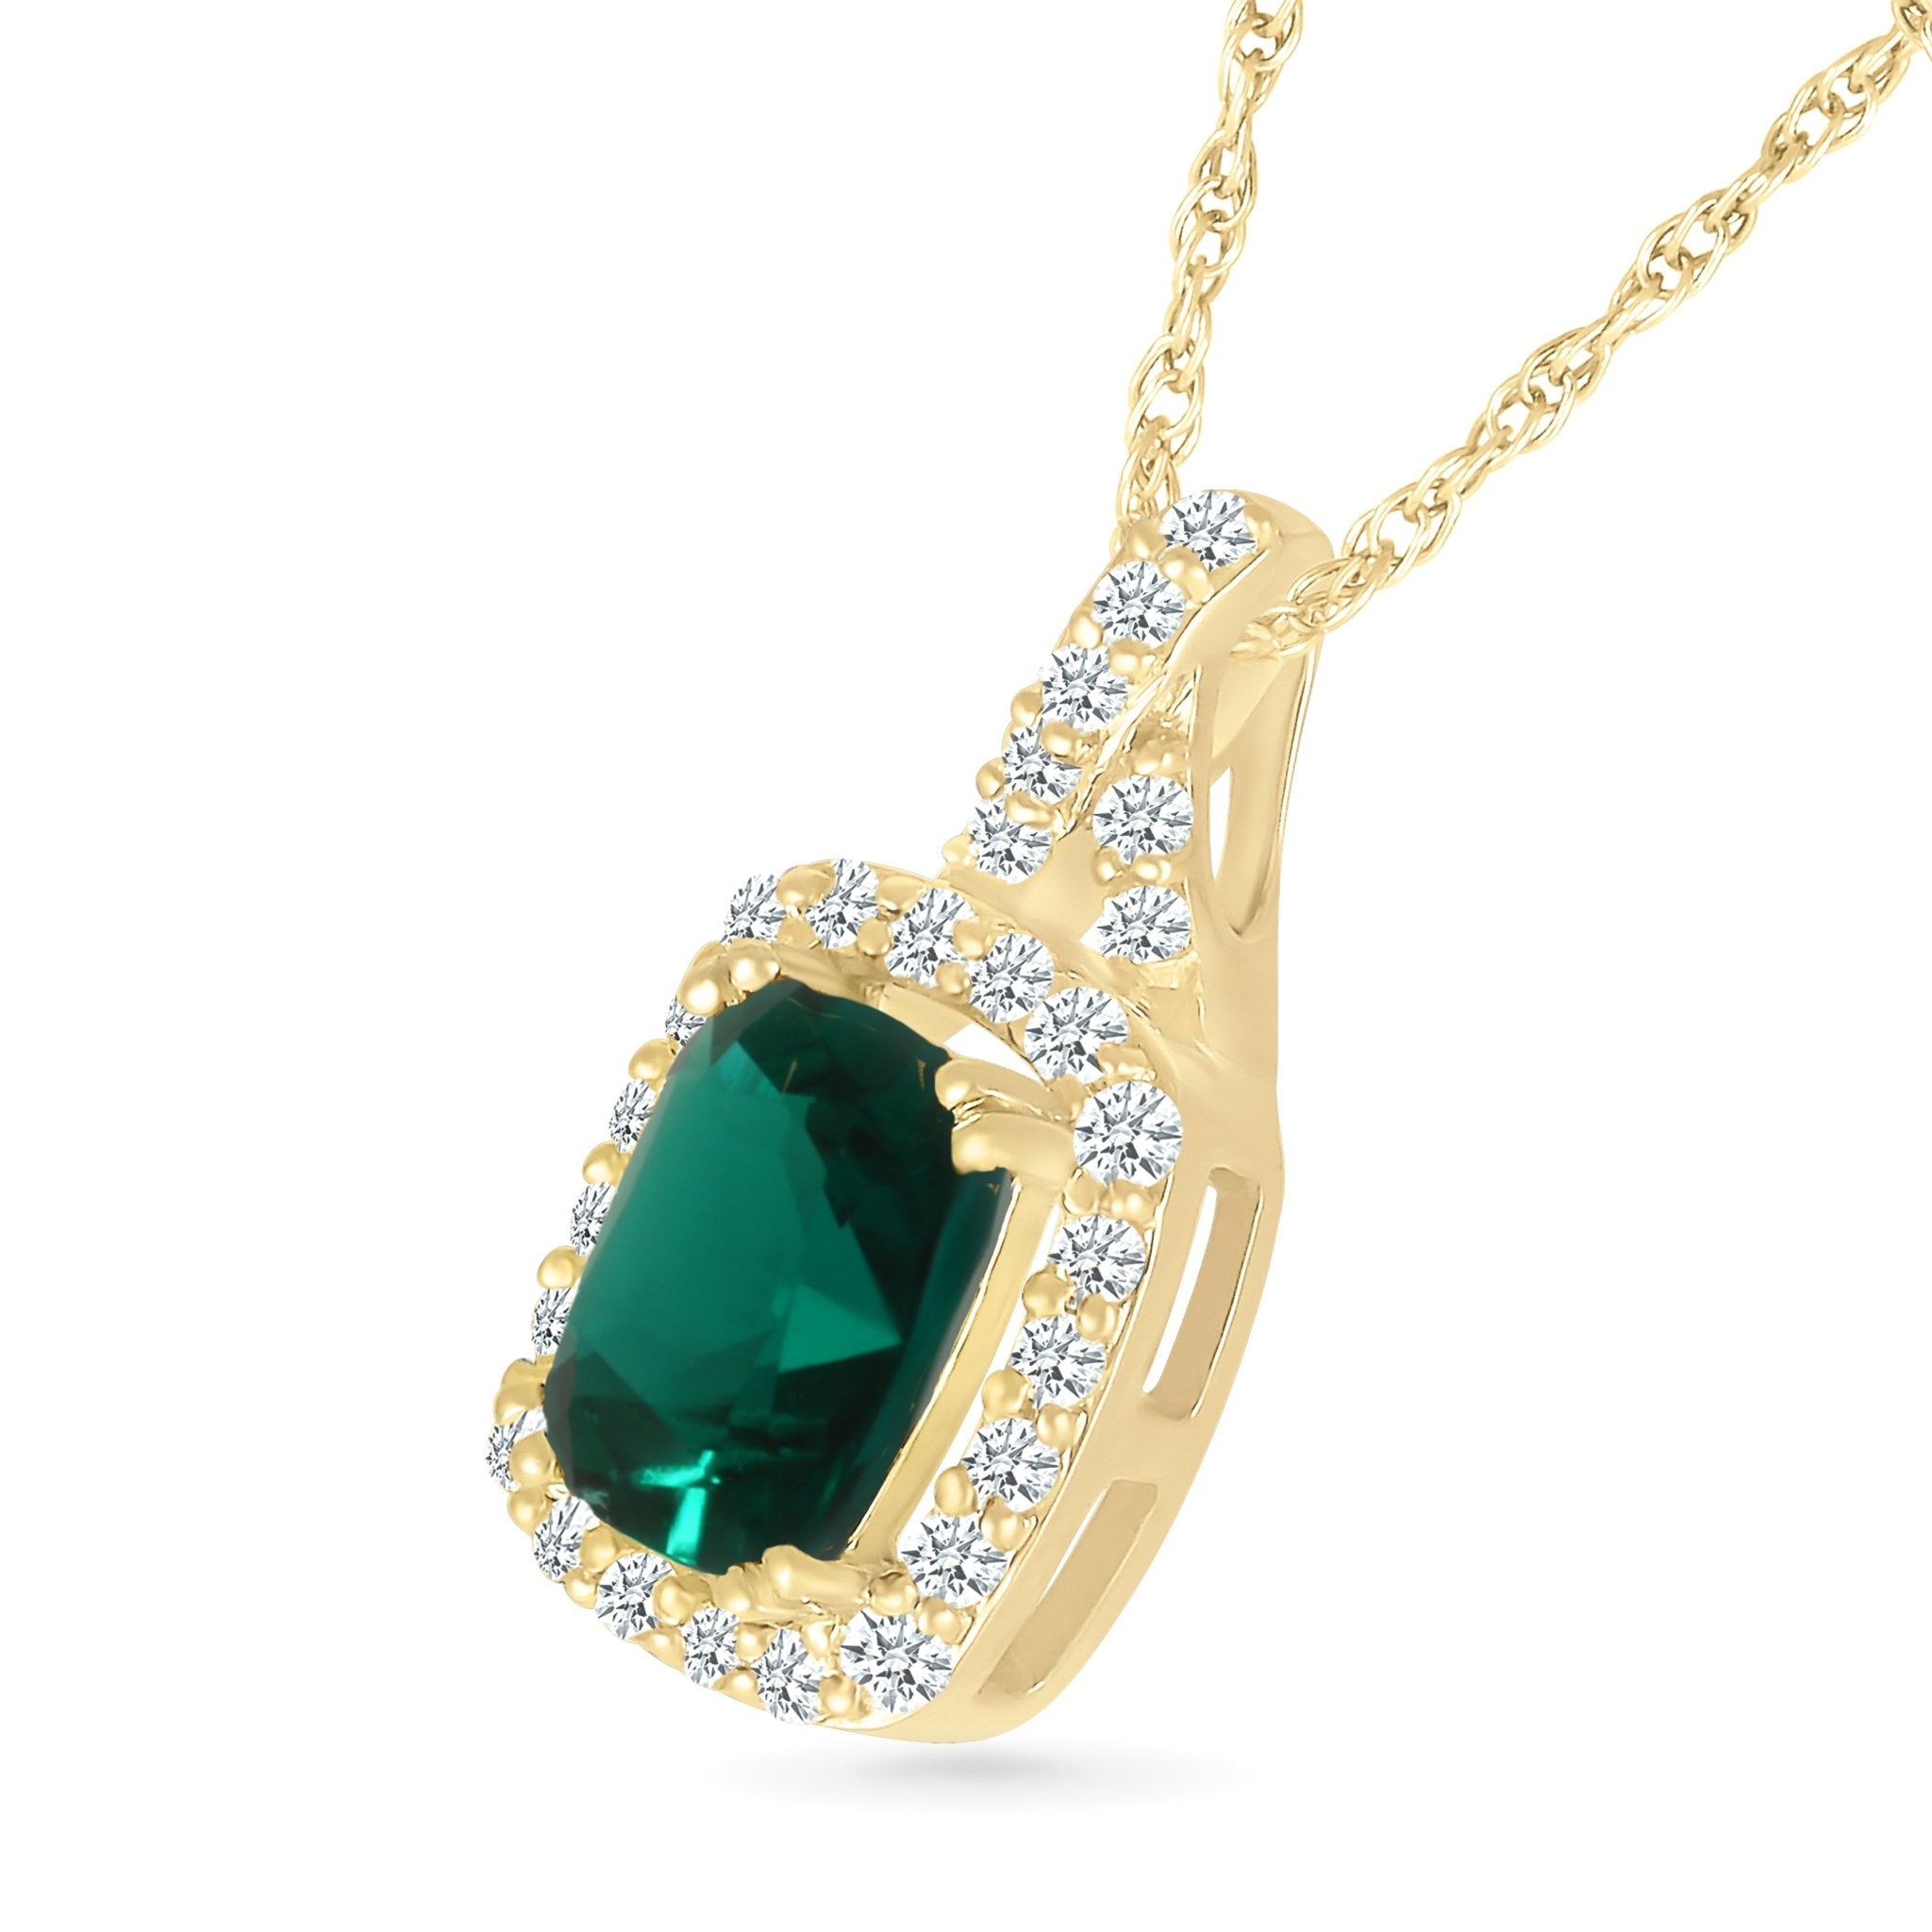 Cushion Cut Emerald Pendant with White Sapphire Halo and Bail Necklaces Estella Collection #product_description# 32729 10k Birthstone Birthstone Jewelry #tag4# #tag5# #tag6# #tag7# #tag8# #tag9# #tag10#